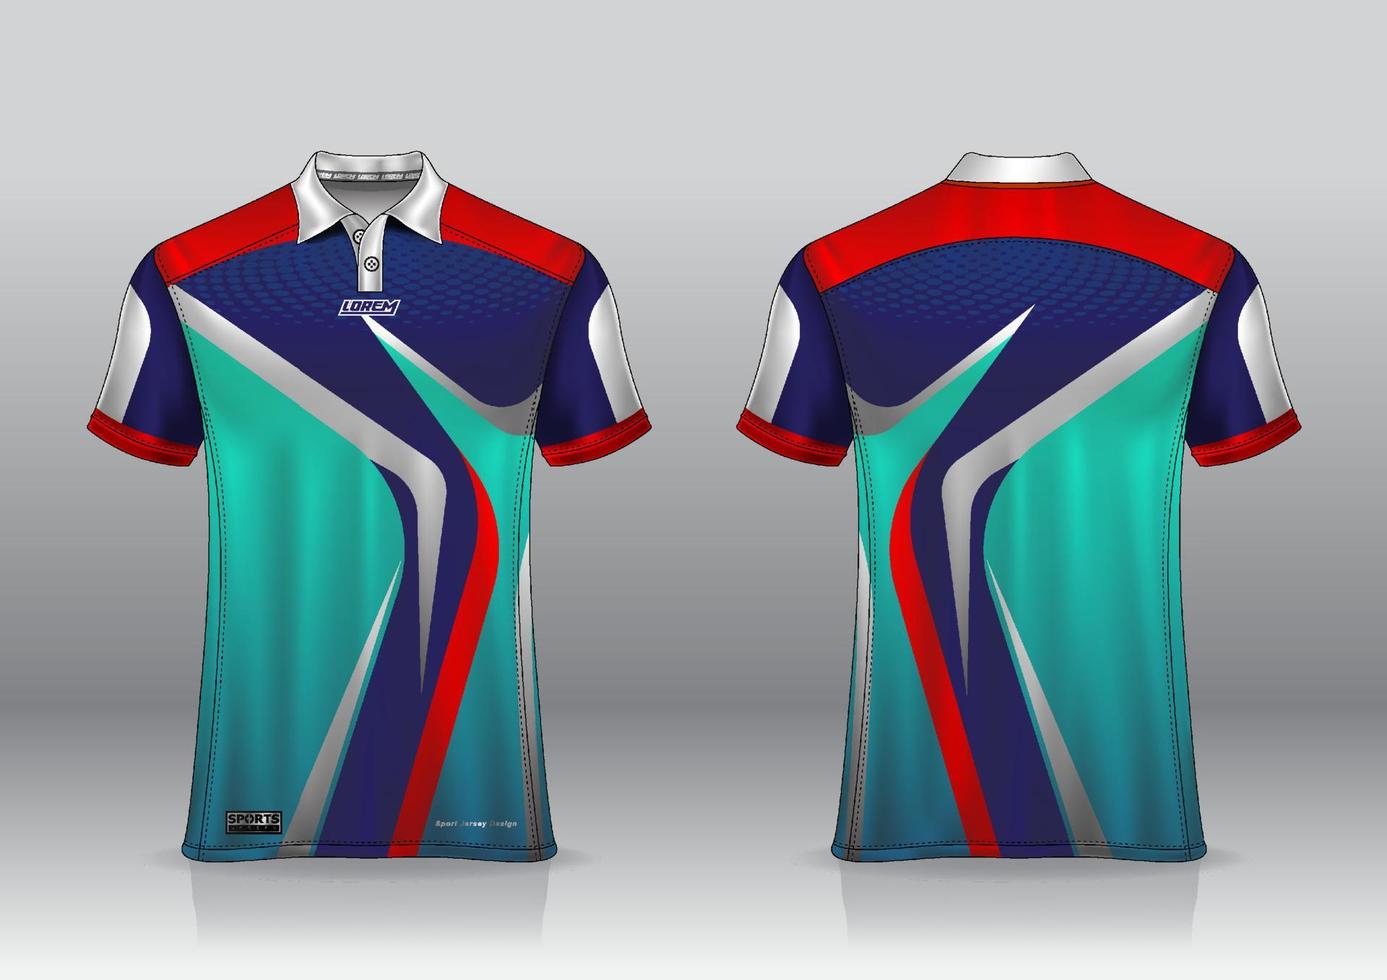 Polo shirt uniform design, can be used for badminton, golf in front view, back view. jersey mockup Vector, design premium very simple and easy to customize vector